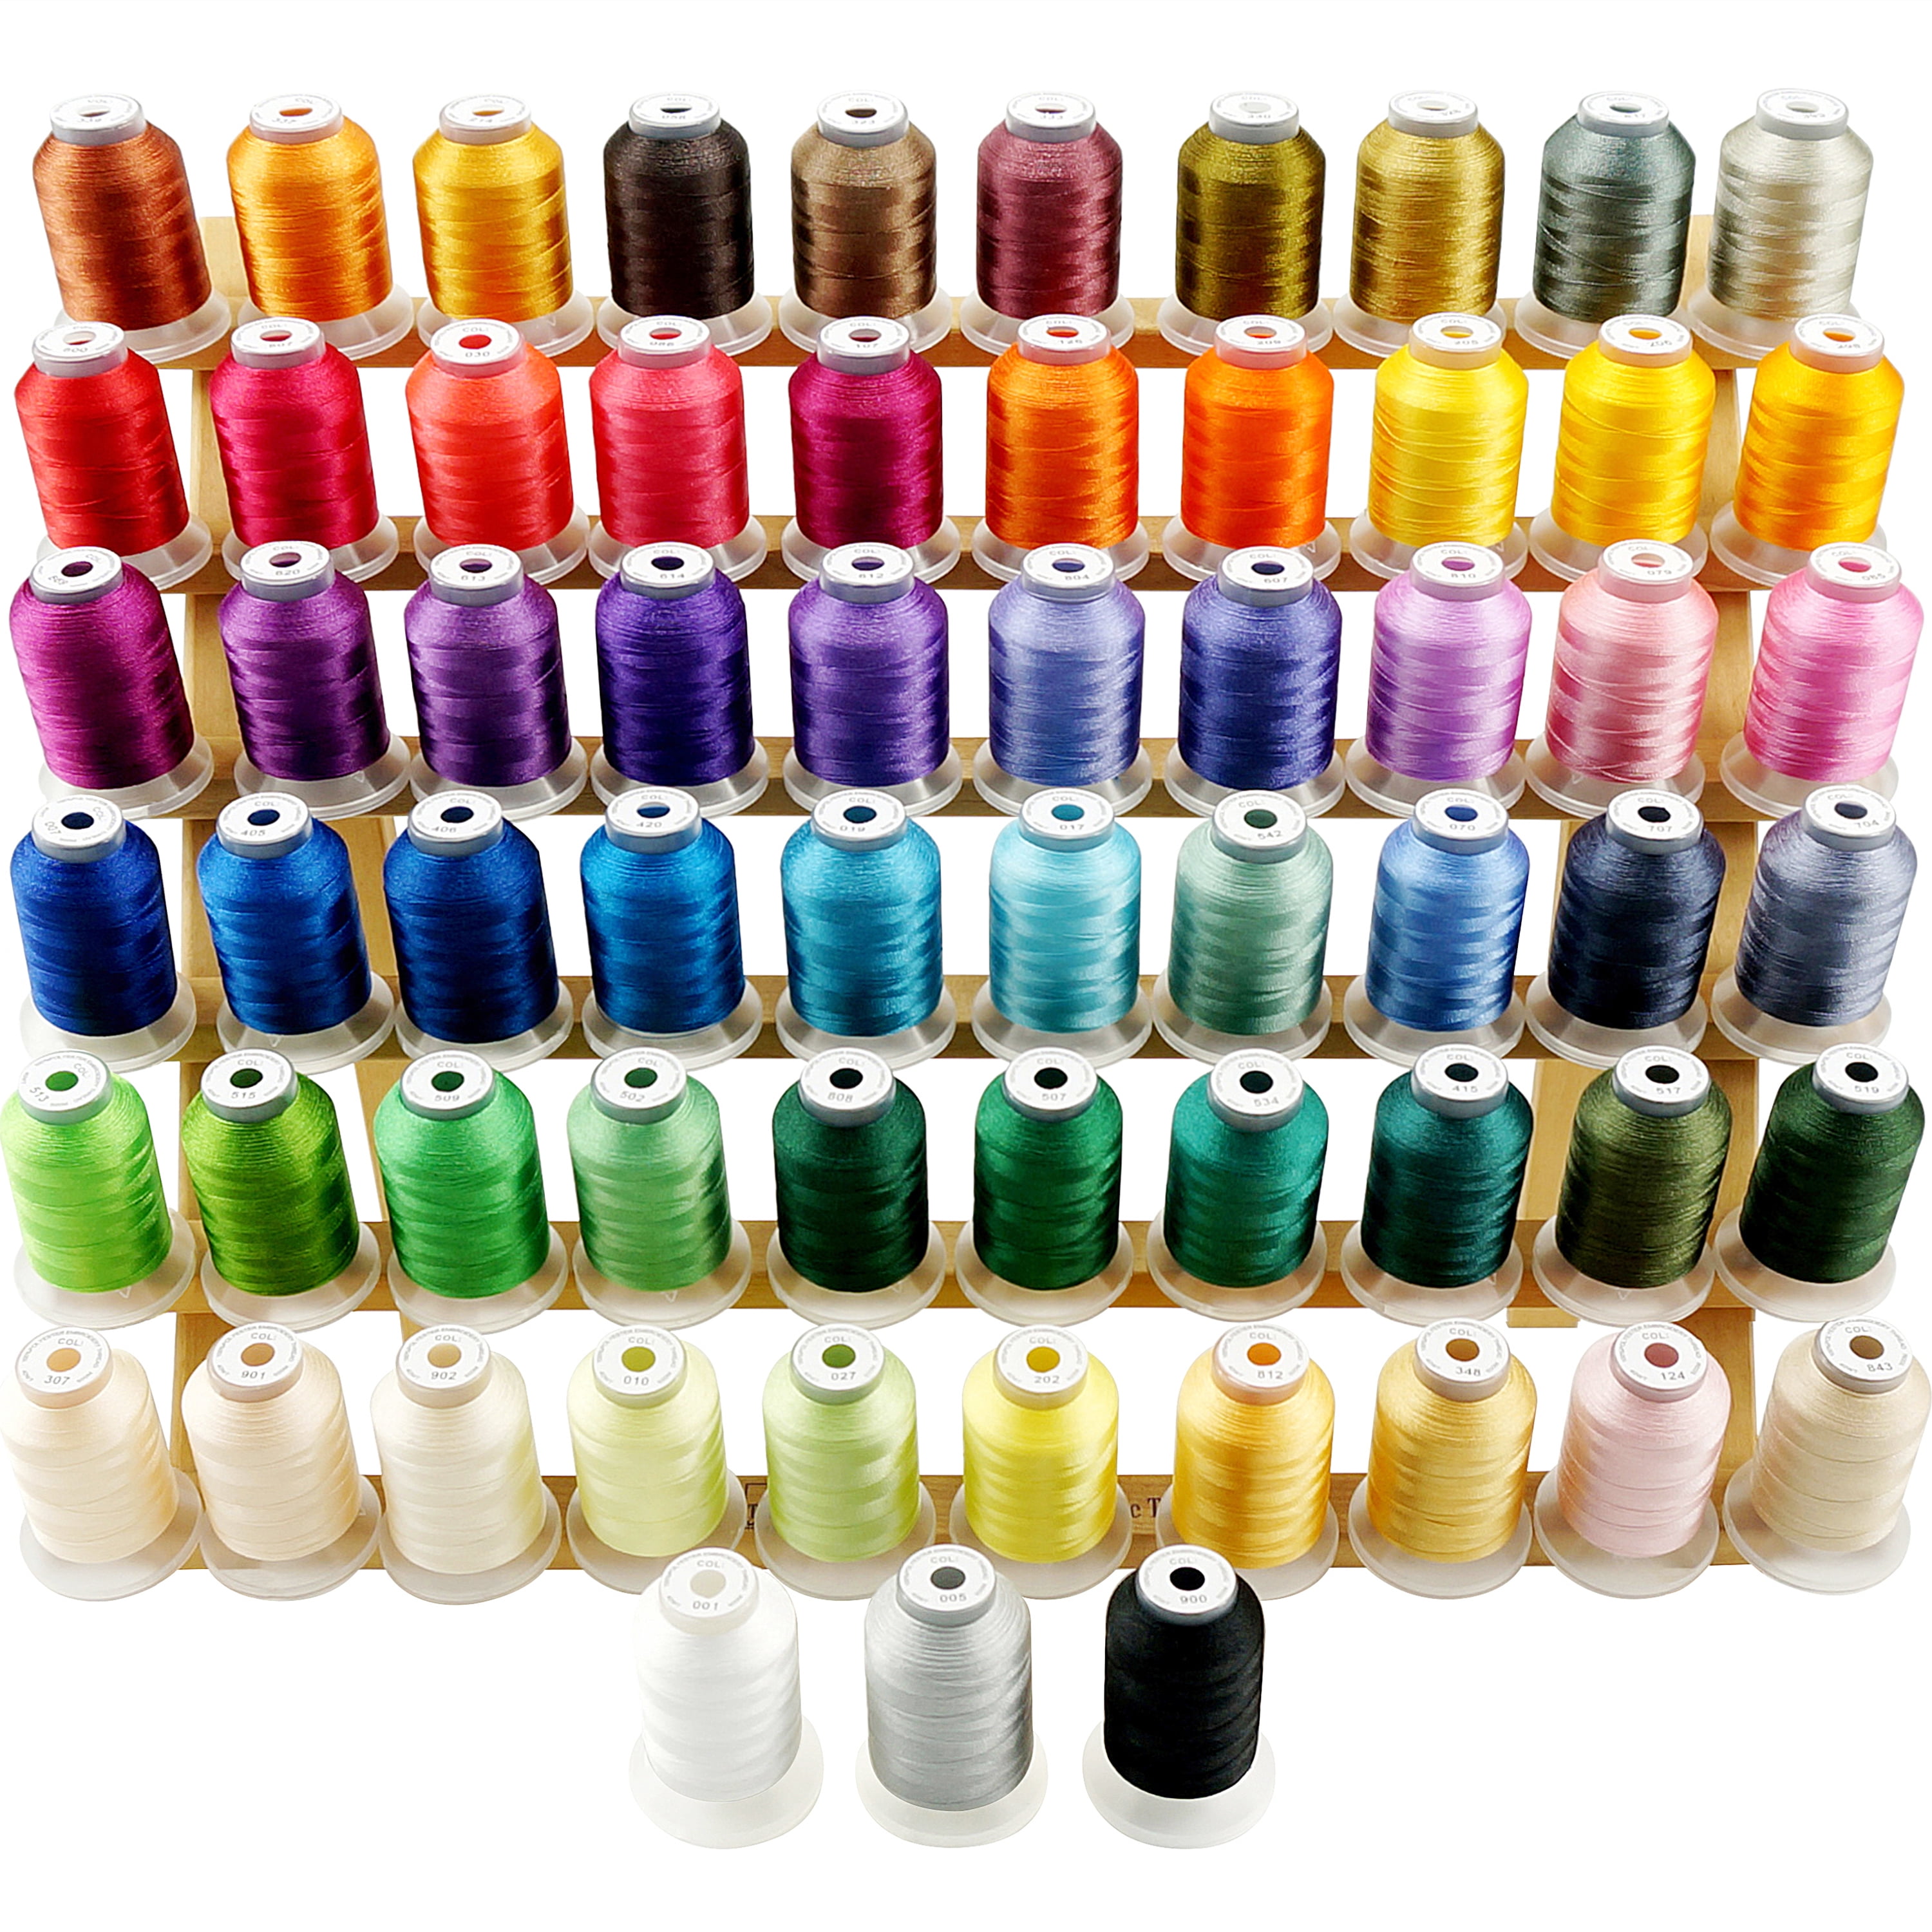 New Brothread 50 Colors Variegated Polyester Embroidery Machine Thread